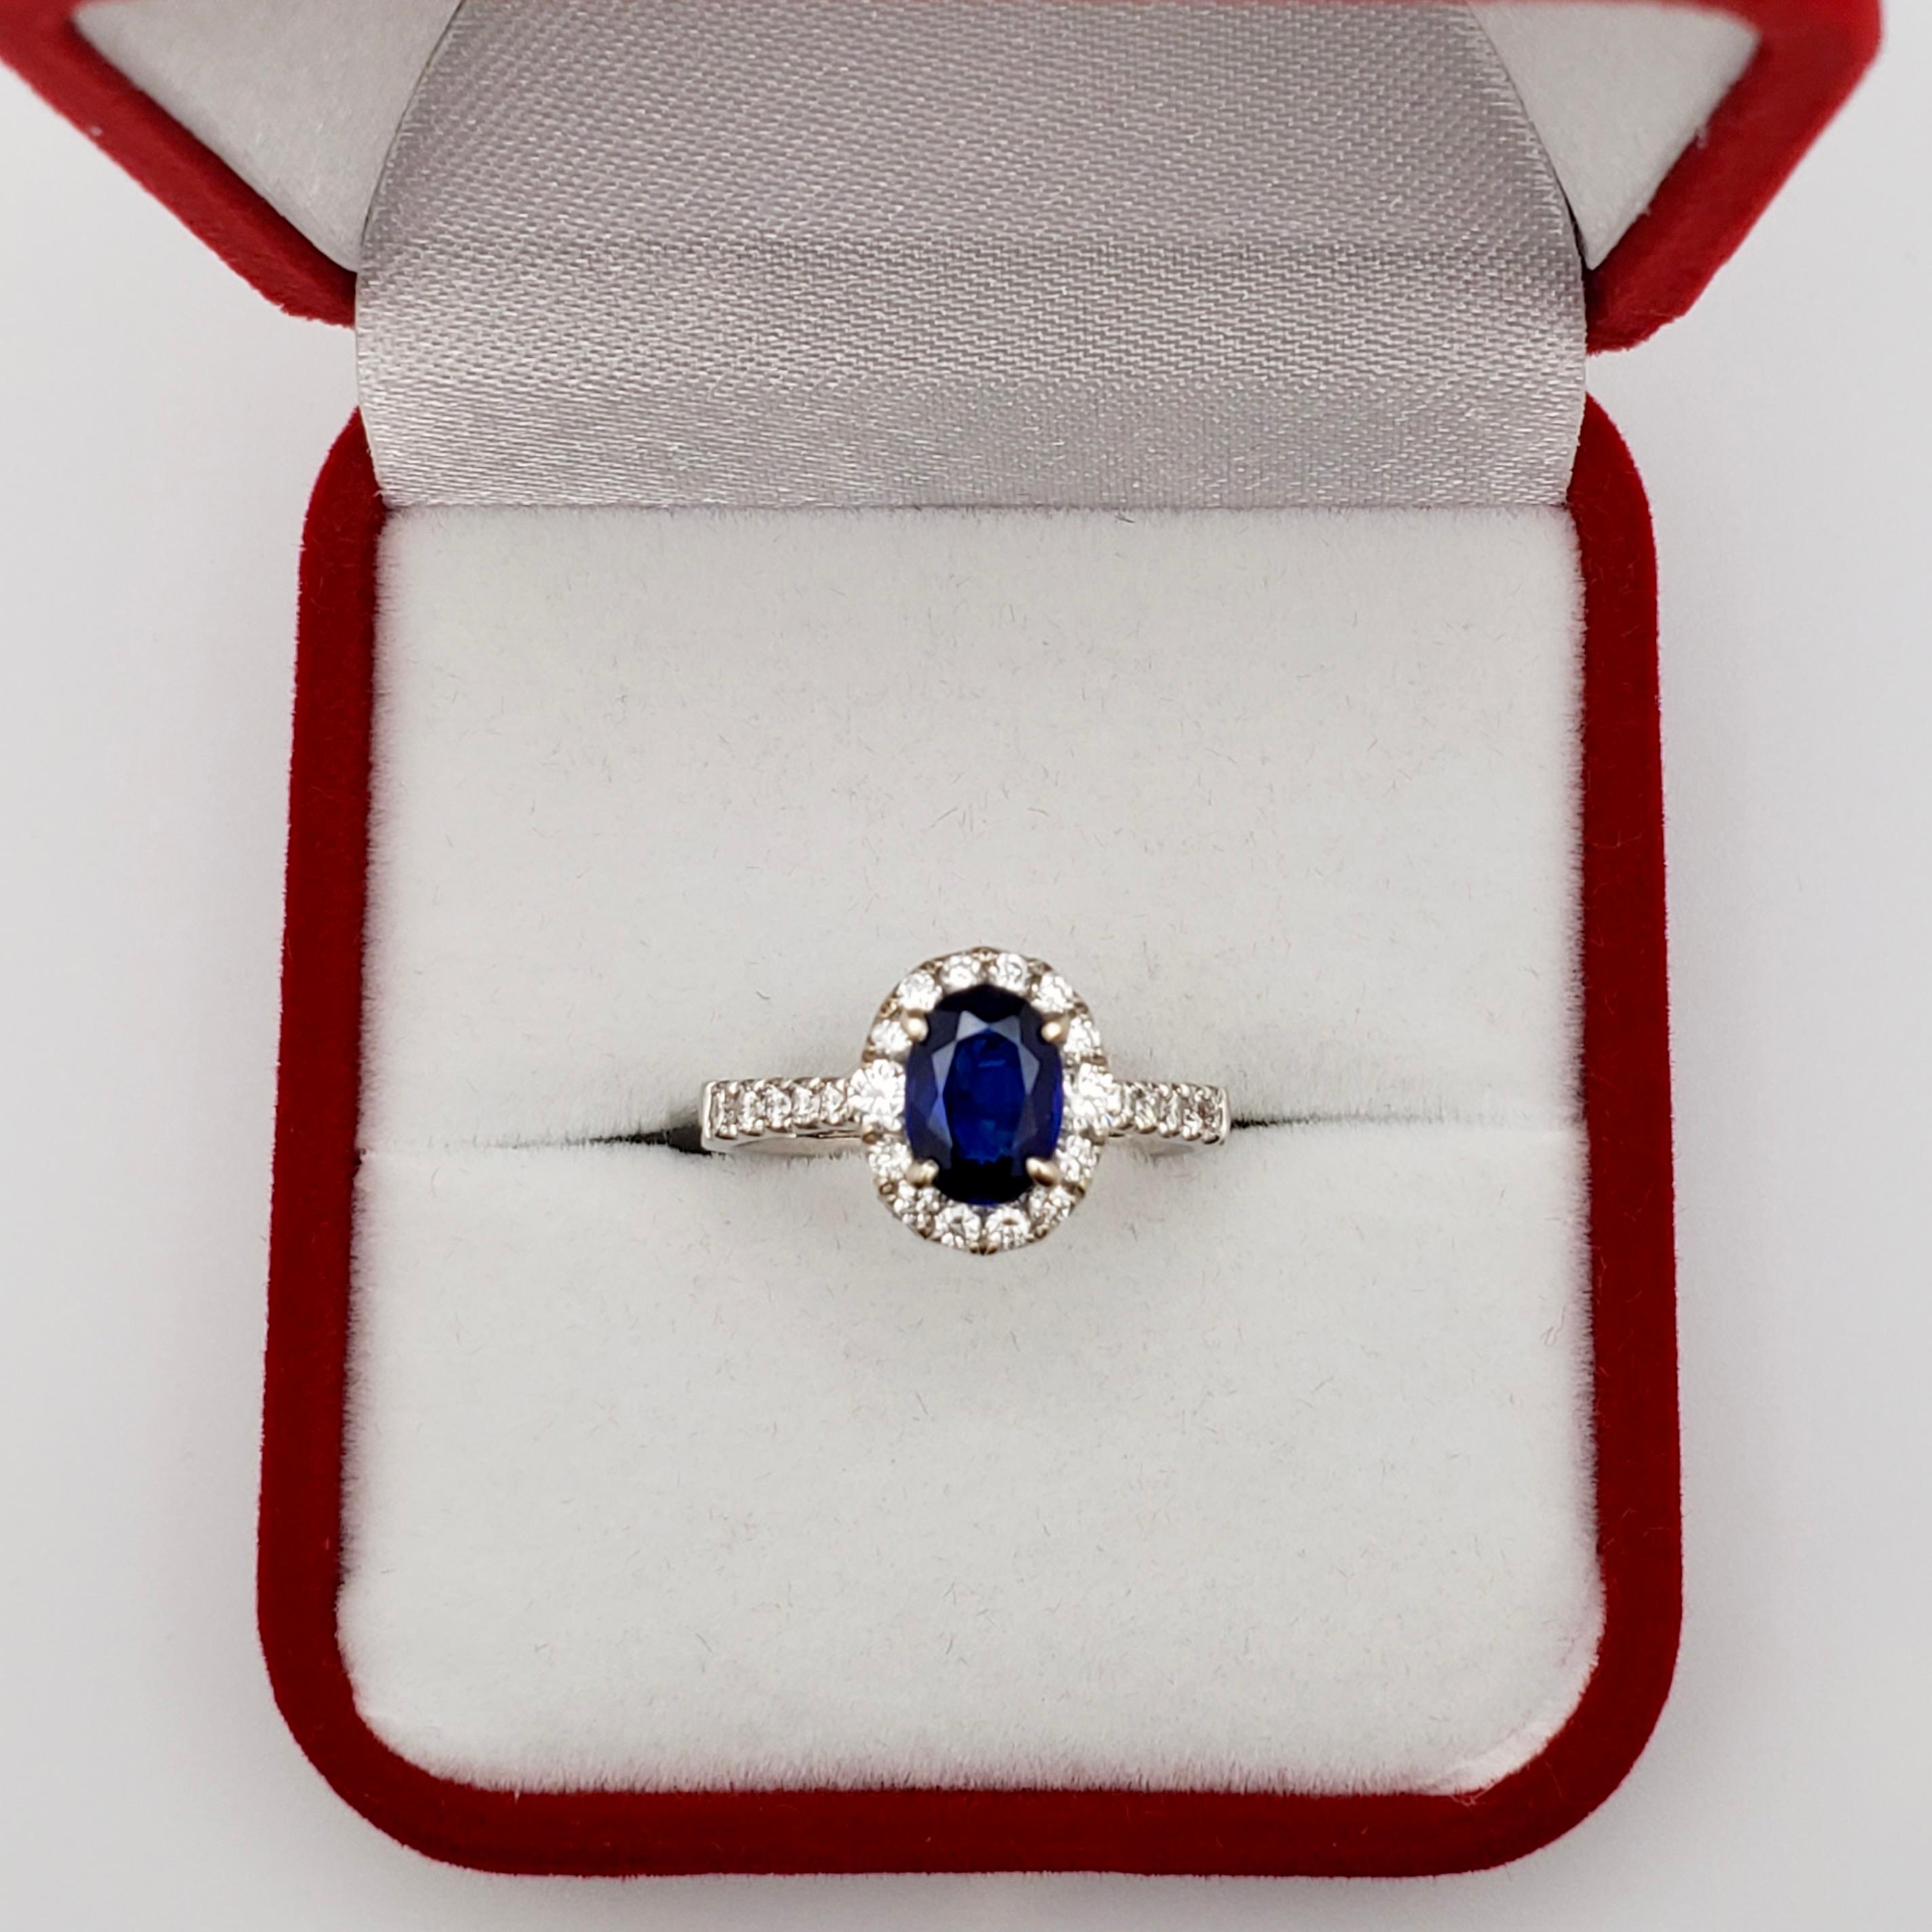 Women's 1.50 CT GIA Certified Sapphire Diamond Ring 18K White Gold For Sale